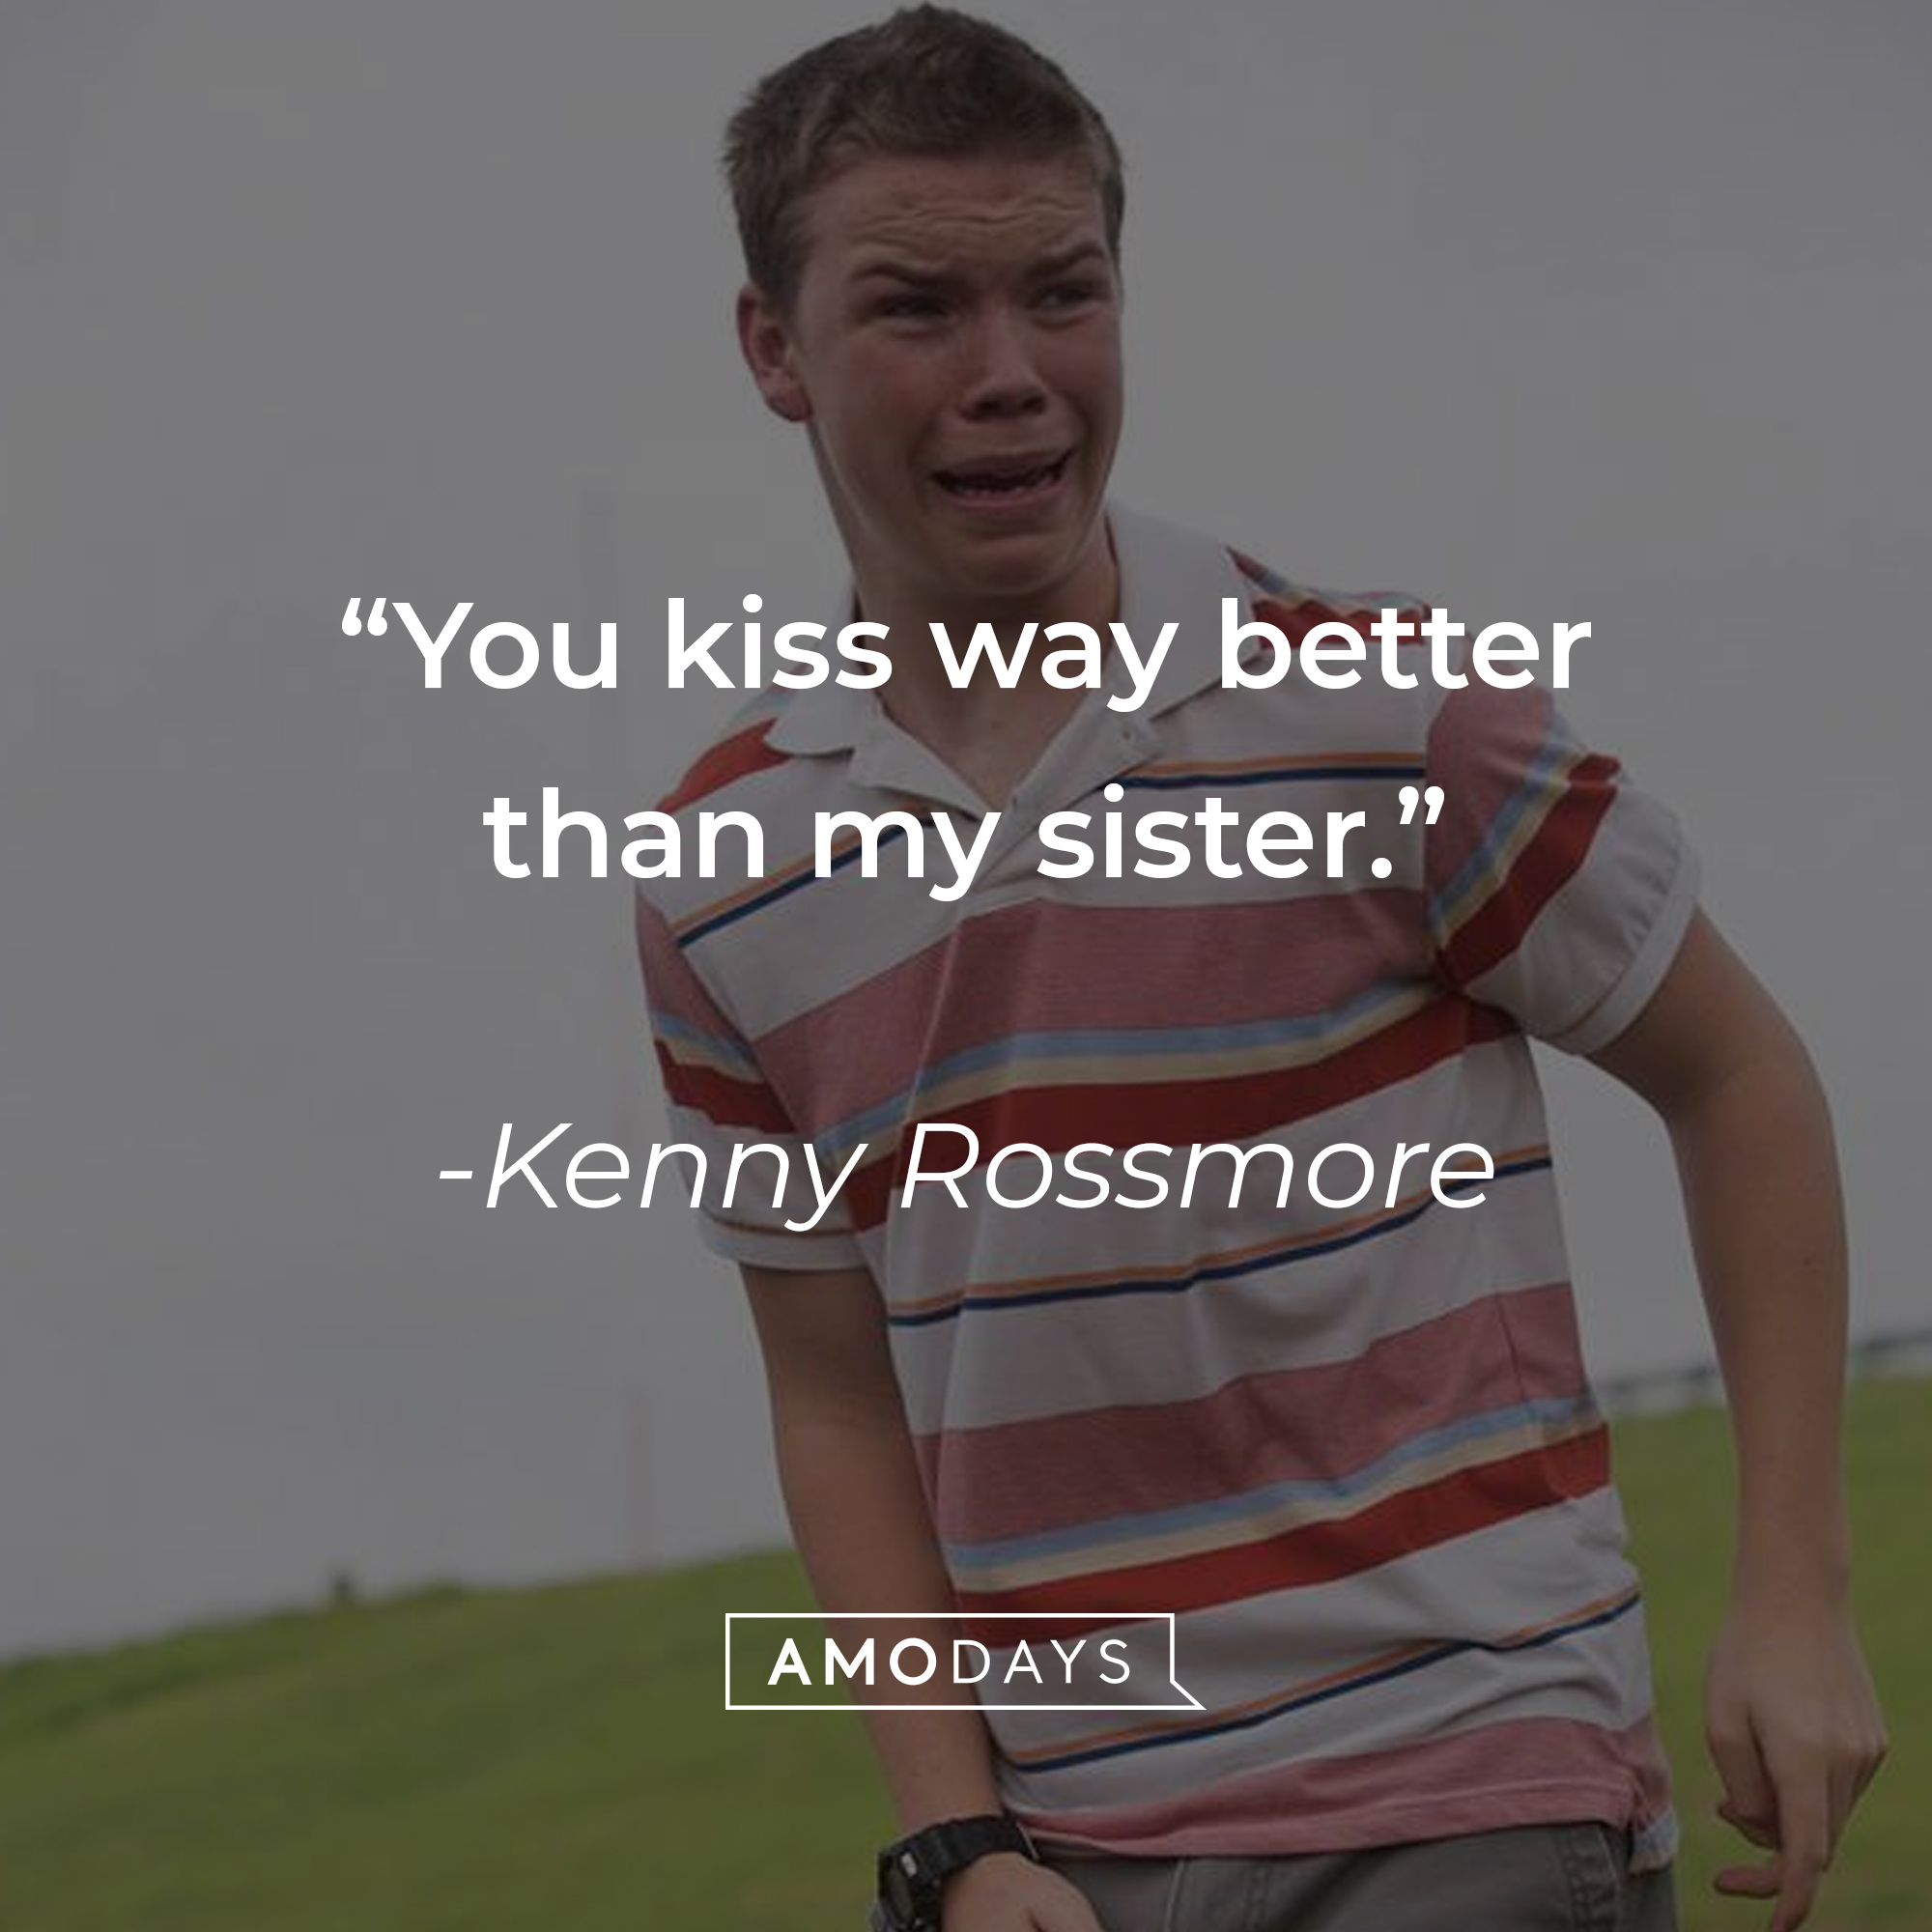 Kenny Rossmore's quote: “You guys are getting paid?” | Source: facebook.com/WereTheMillersUK